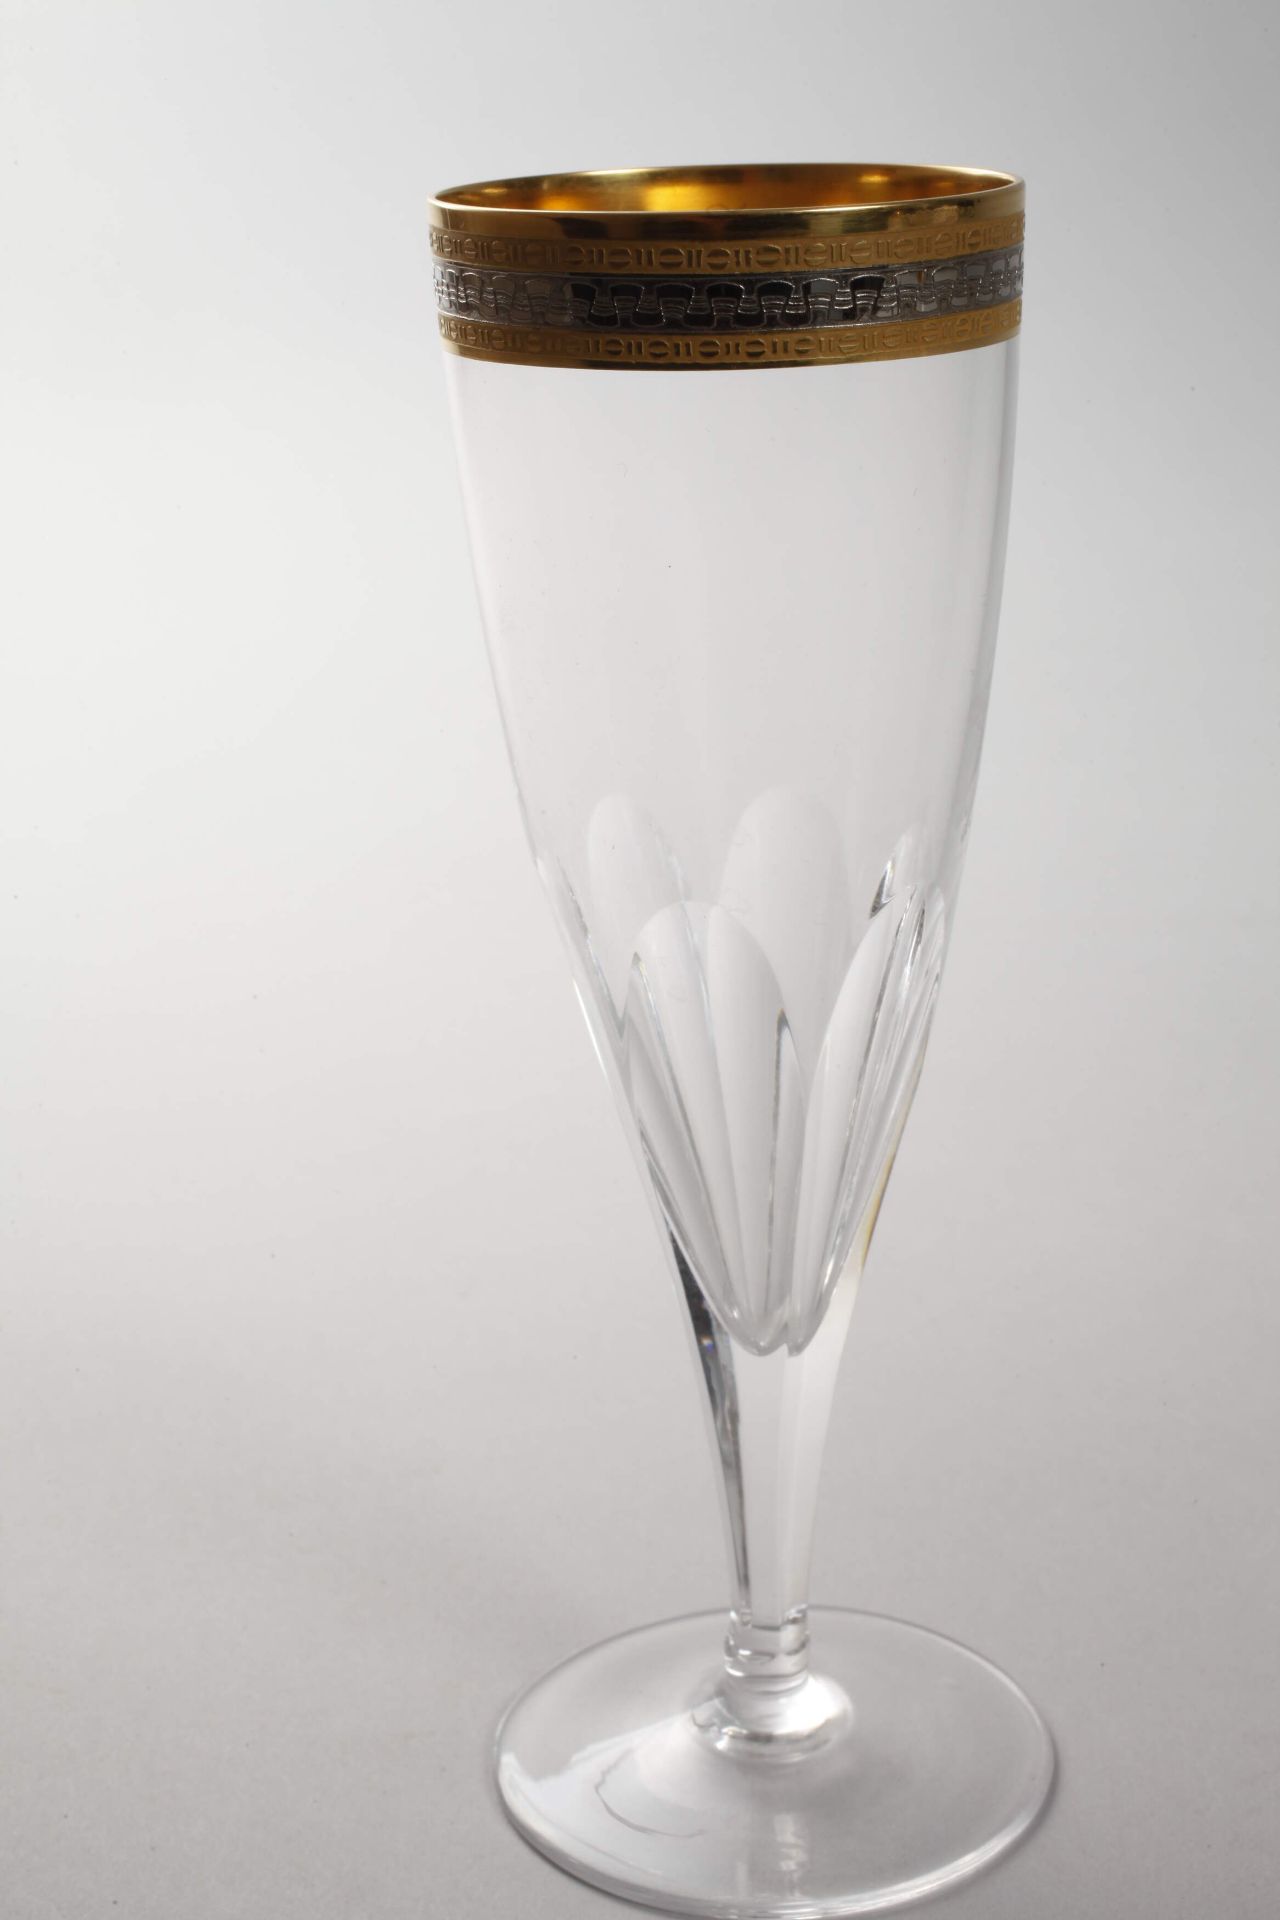 Set of glasses with gold rim - Image 5 of 6